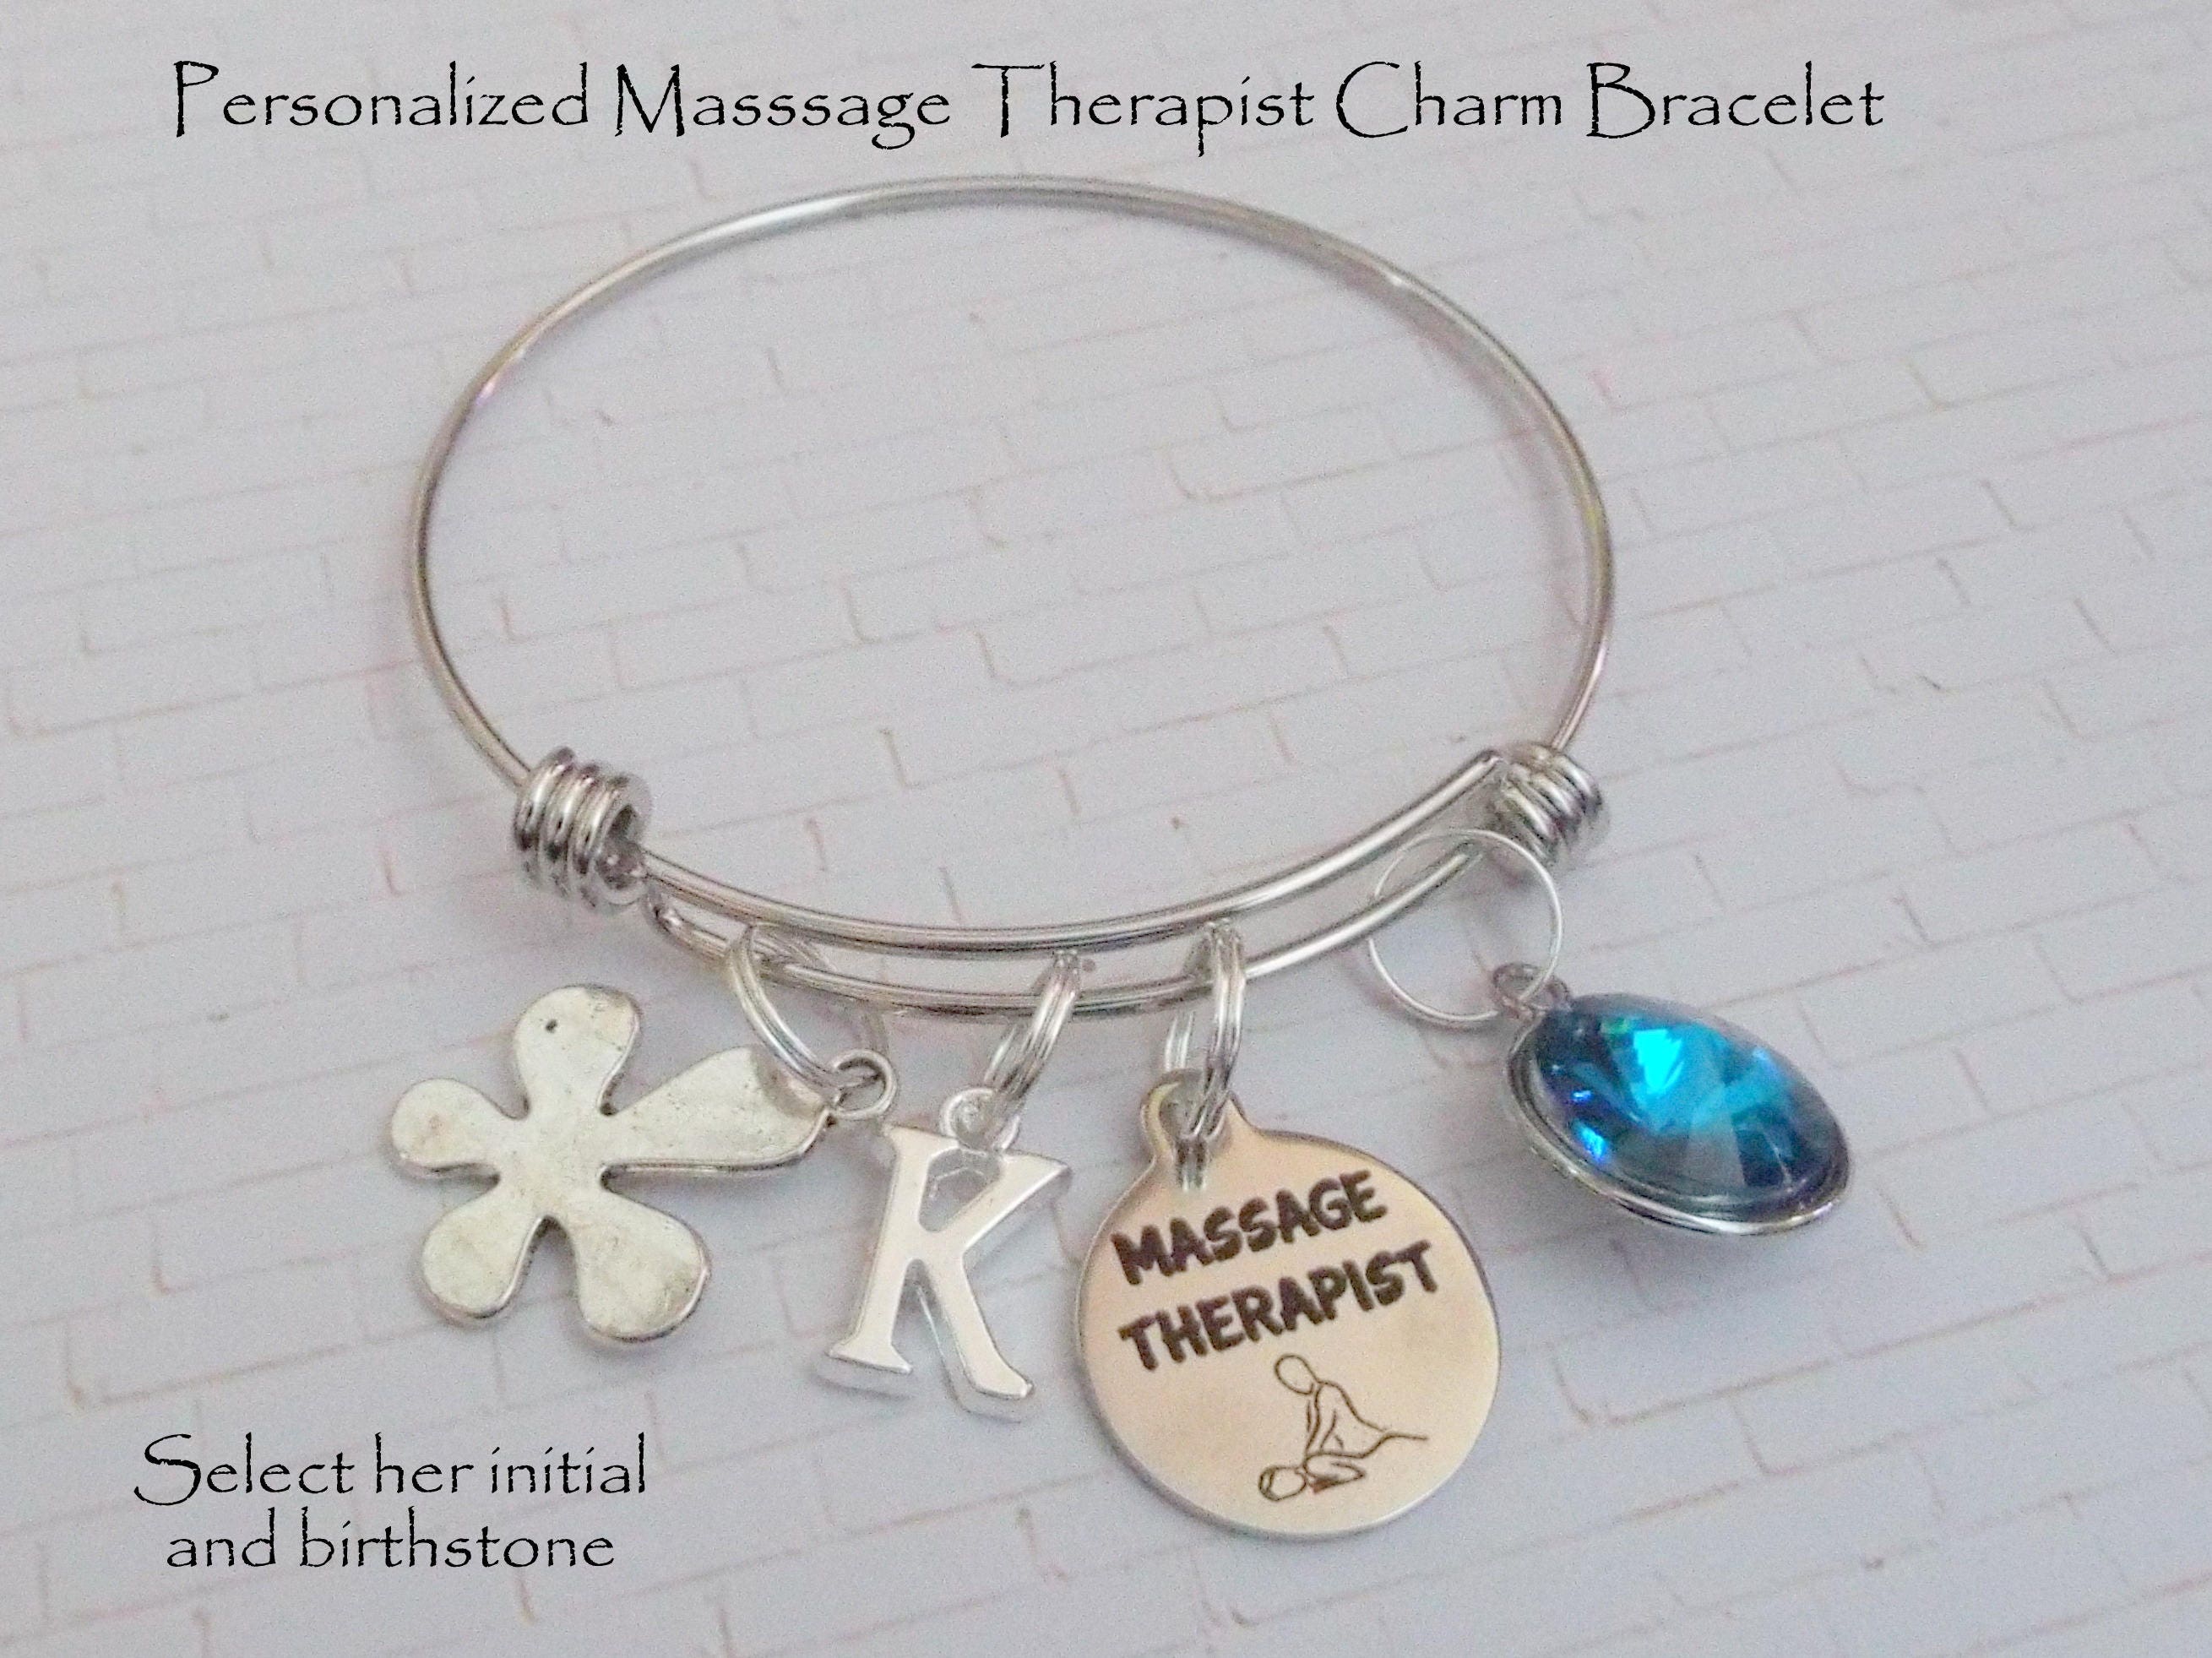 Gift for Massage Therapist, Gift for Masseuse, Massage Therapist Charm